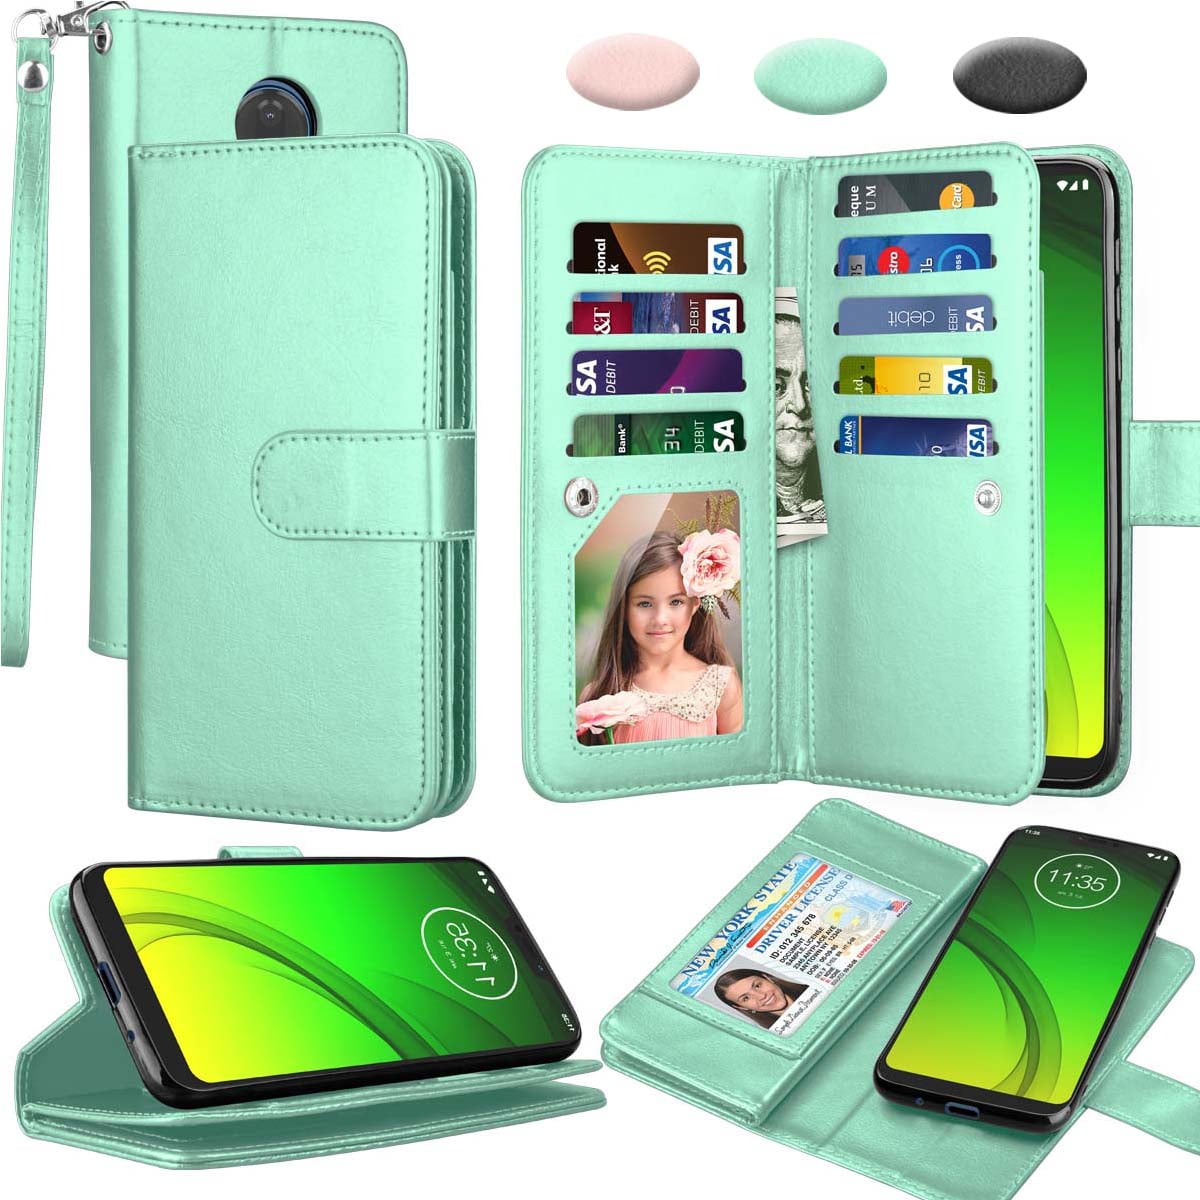 Shockproof Leather Flip Cover Case for Motorola Moto G7 G7 Plus with Card Holder Side Pocket Kickstand NETXI150688 N8 G7Plus NEXCURIO Wallet Case for Moto G7